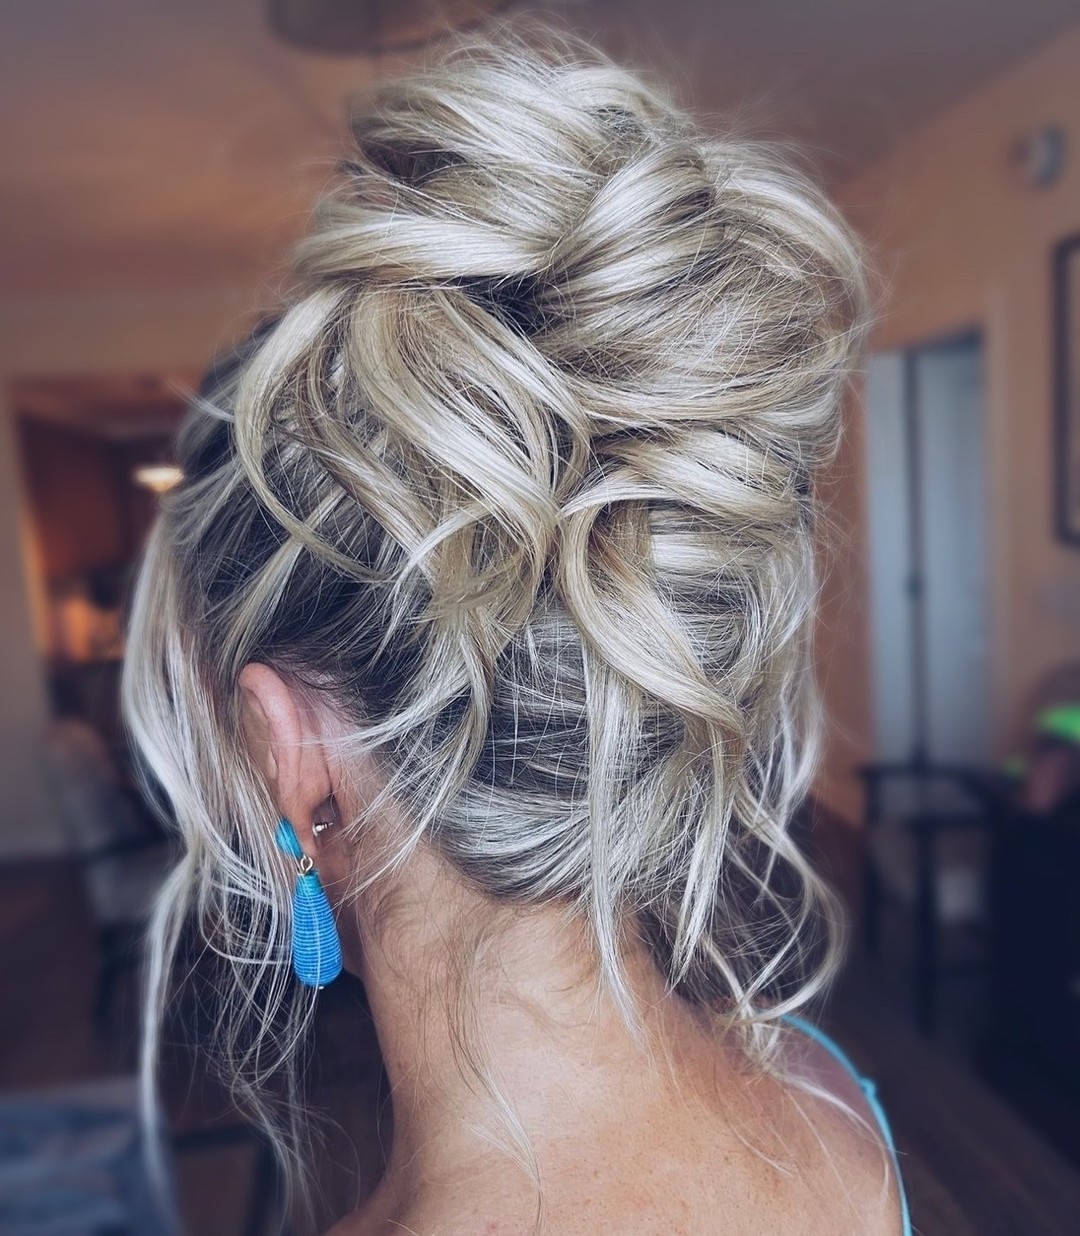 What is the best hairstyle for a bride?